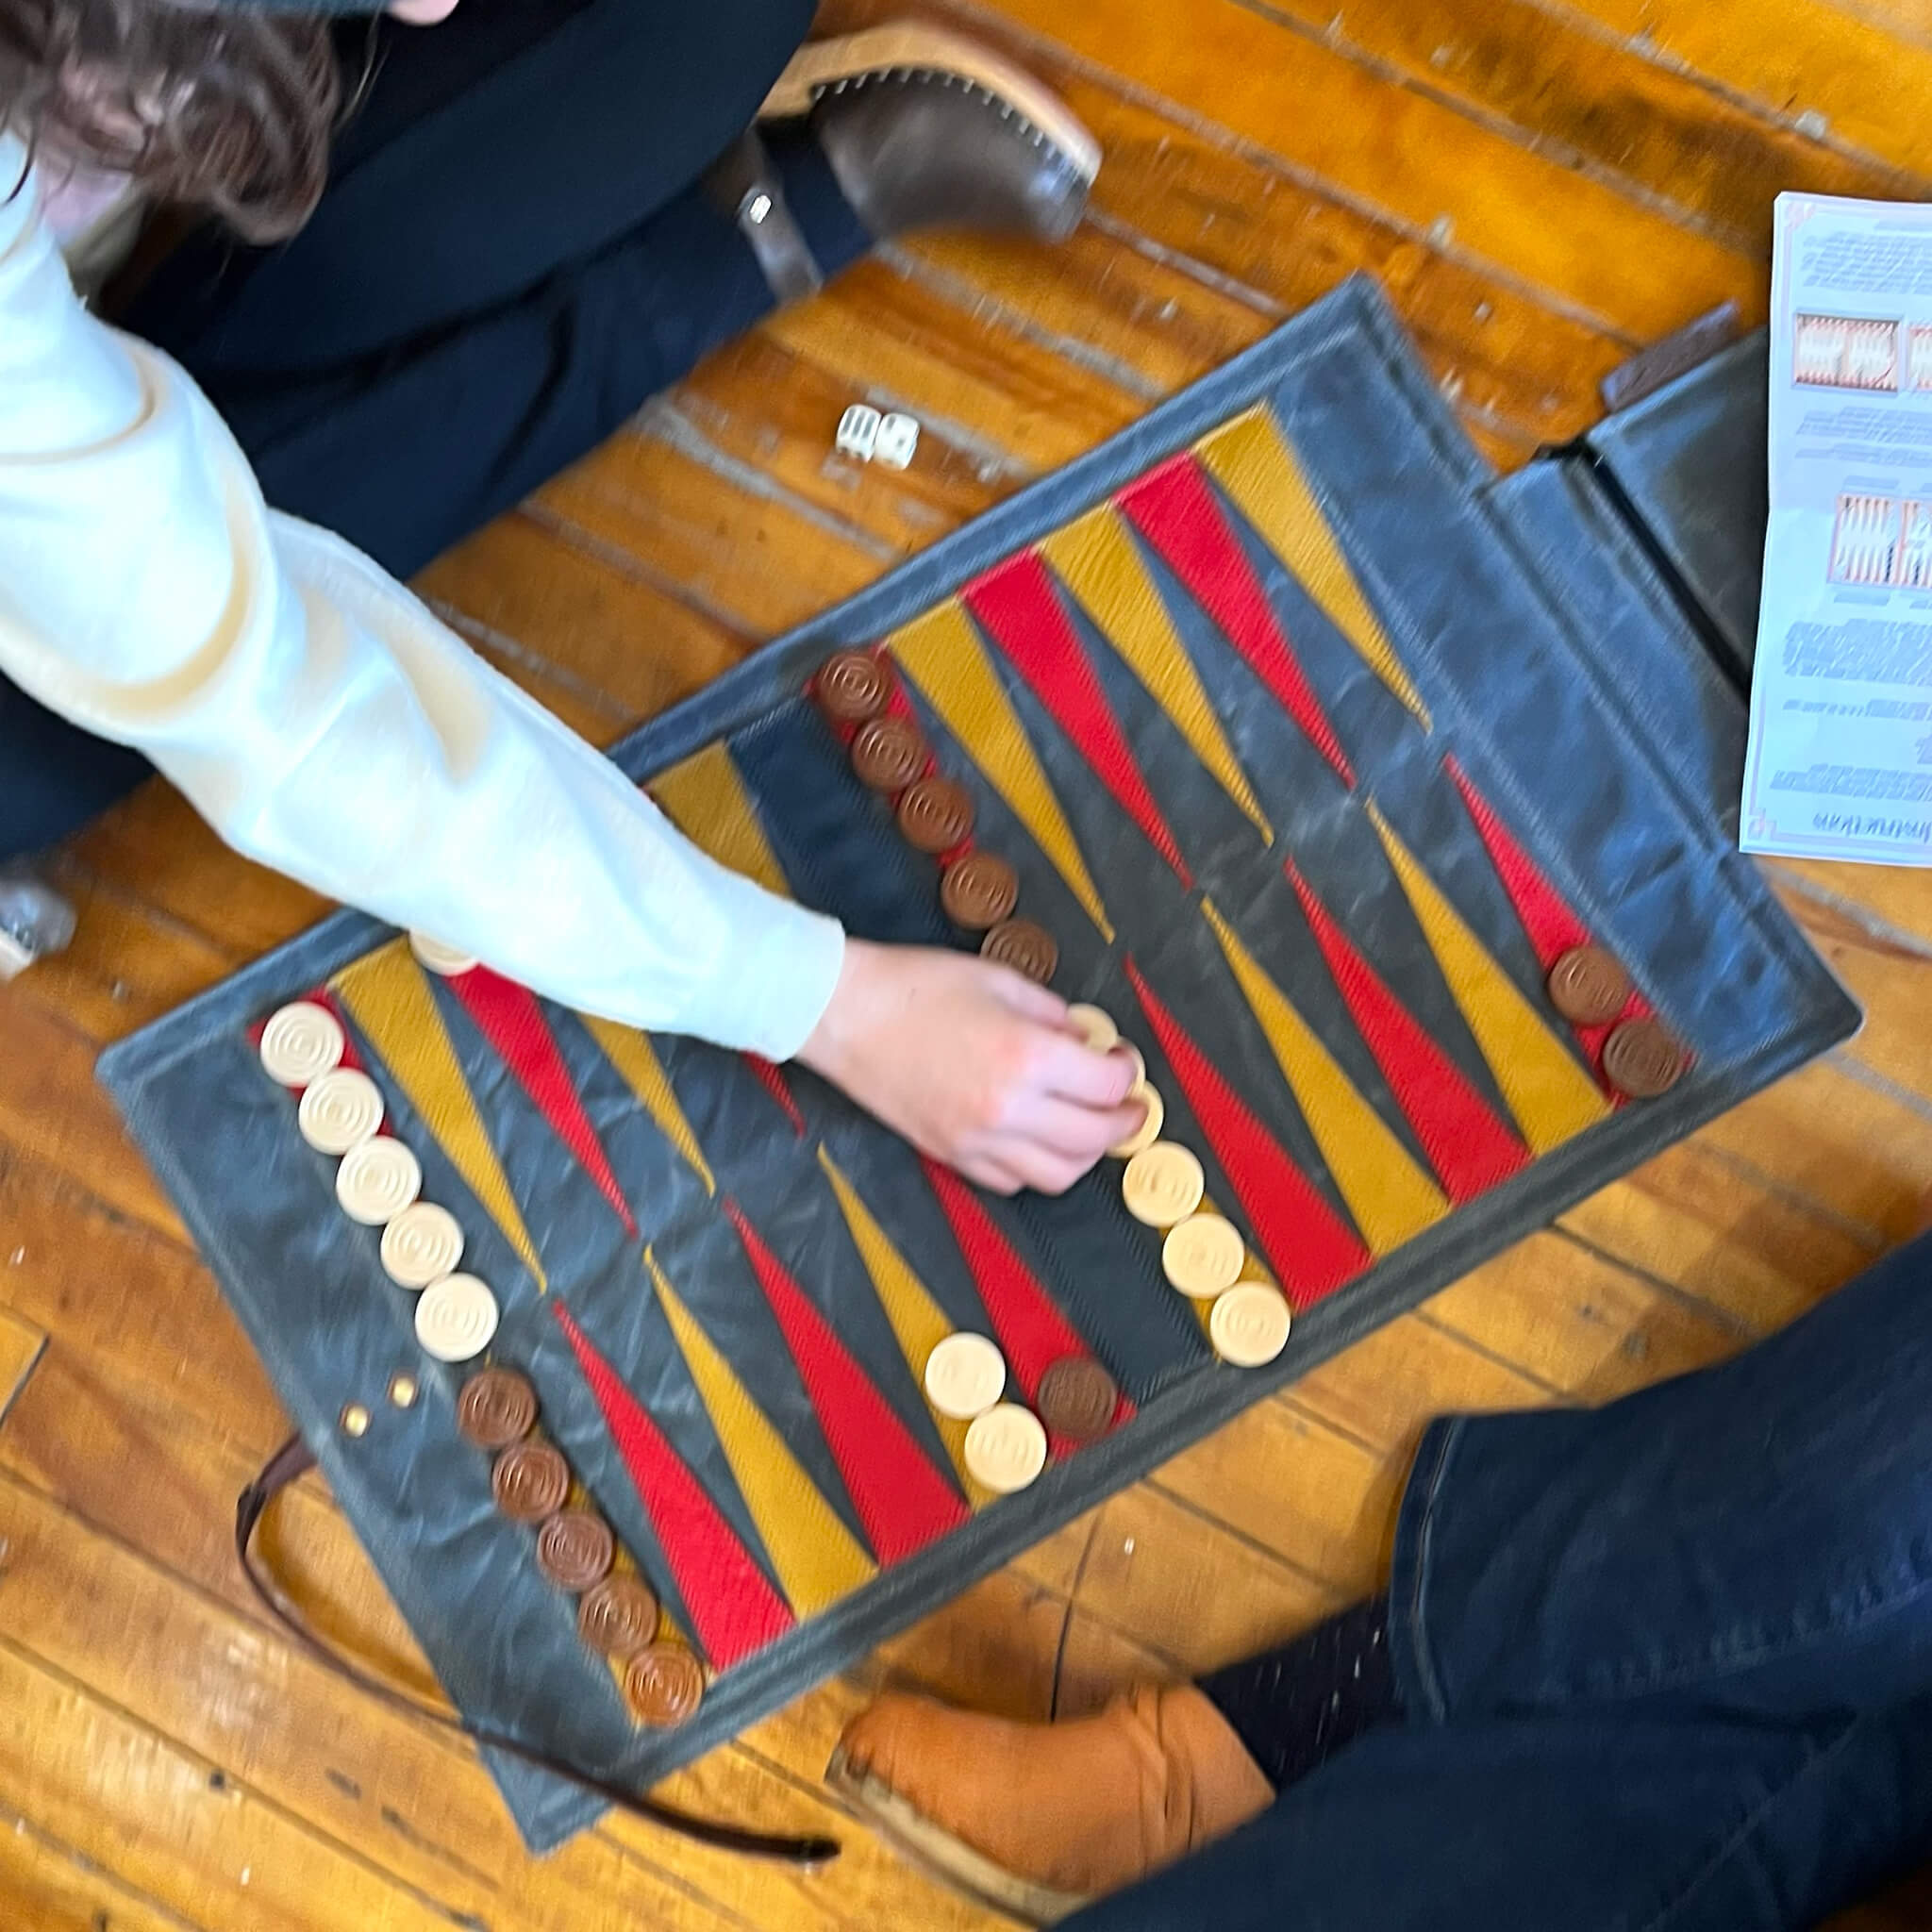 backgammon travel set - handmade leather & waxed canvas game - top view